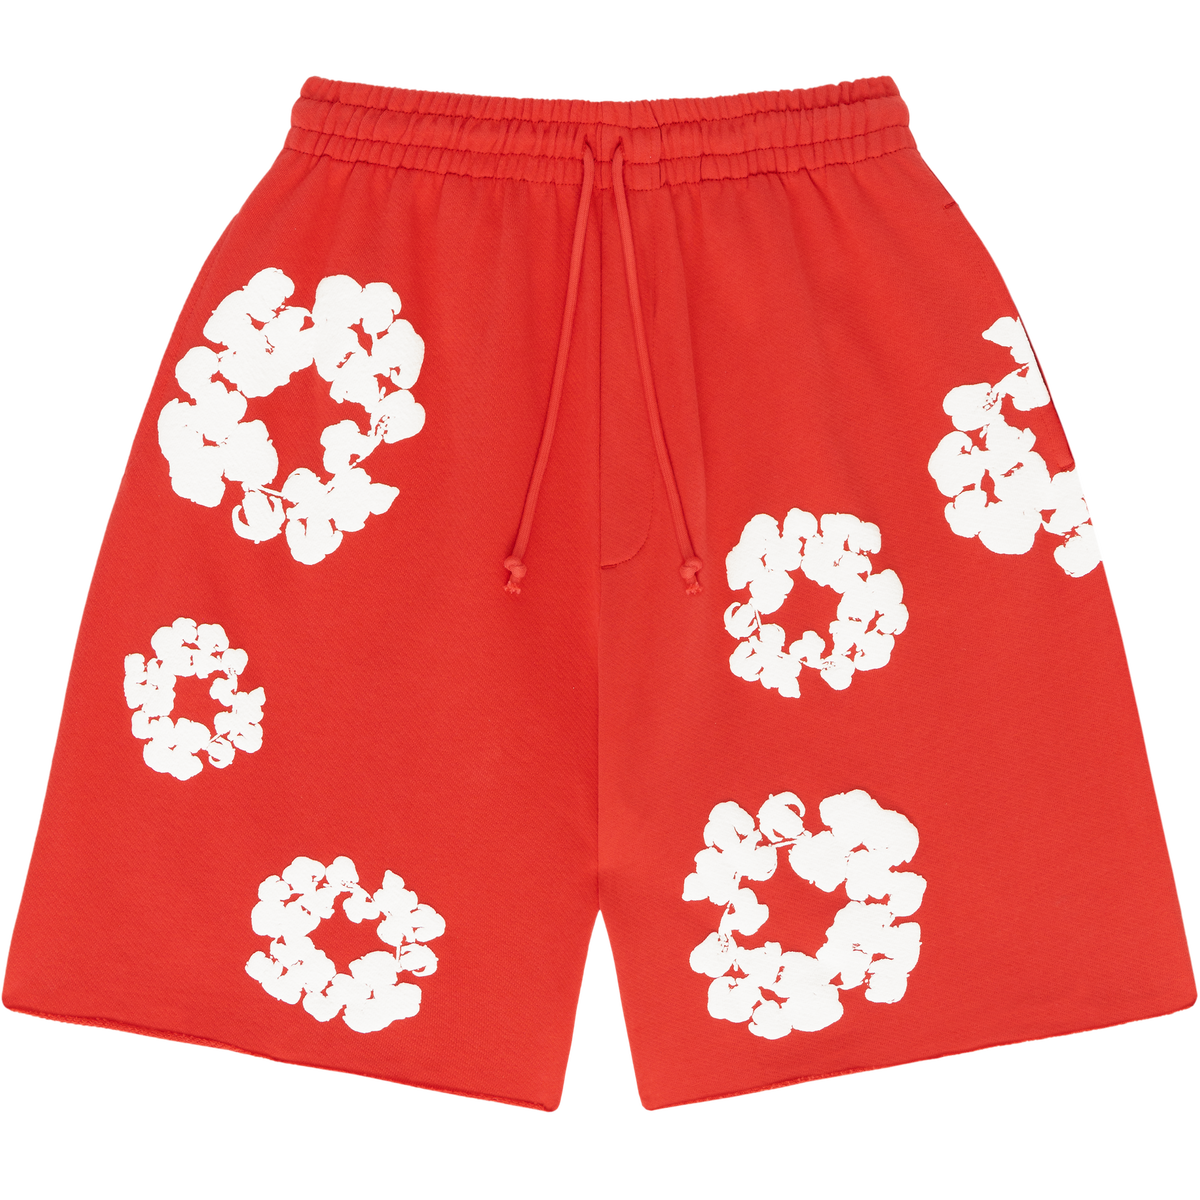 Denim Tears - The Cotton Wreath Shorts Red